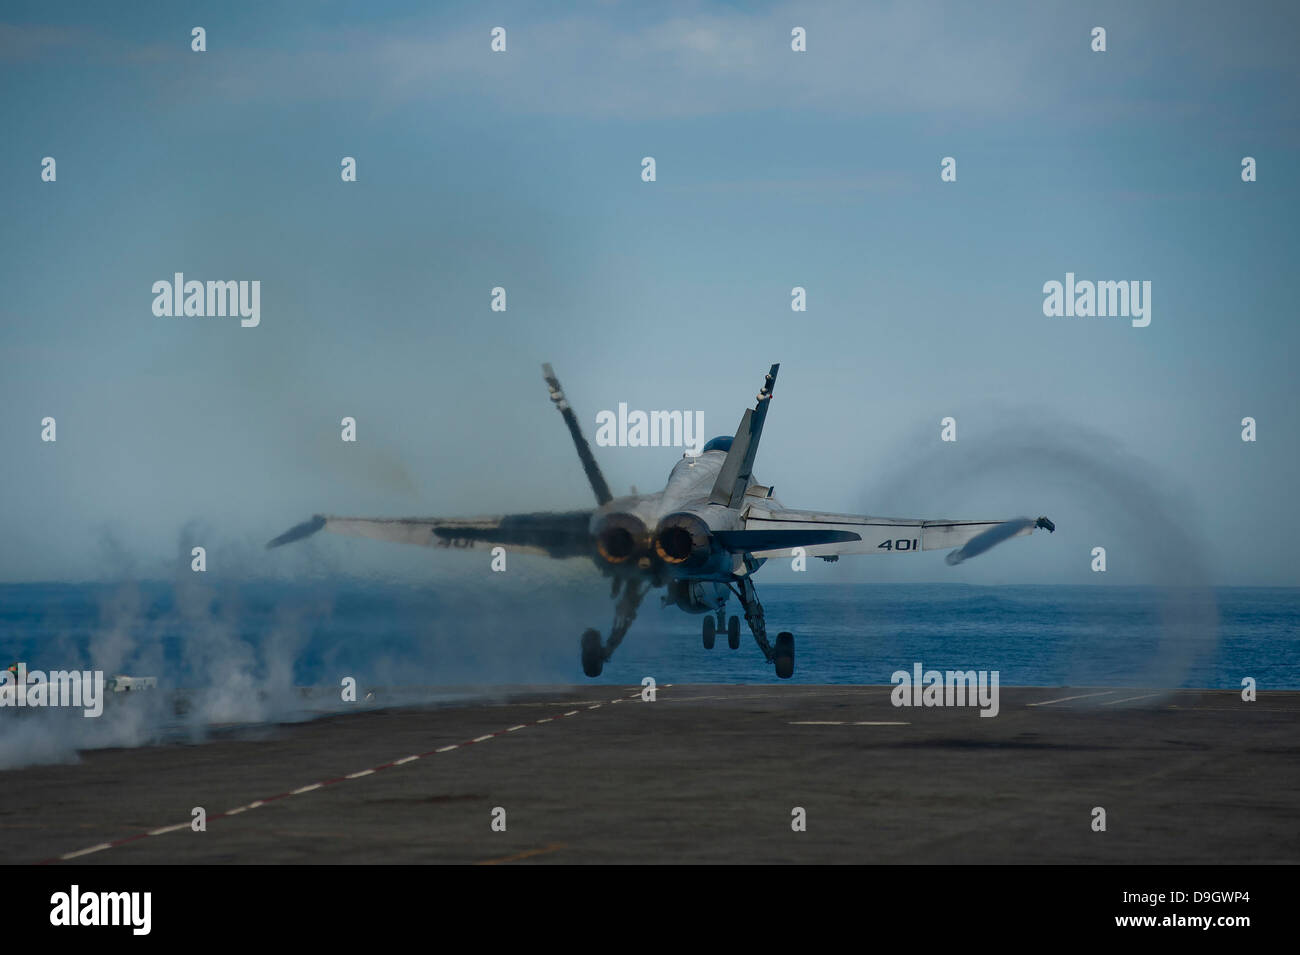 Pacific Ocean, February 16, 2013 - An F/A-18C Hornet launches from the flight deck of the aircraft carrier USS Carl Vinson. Stock Photo